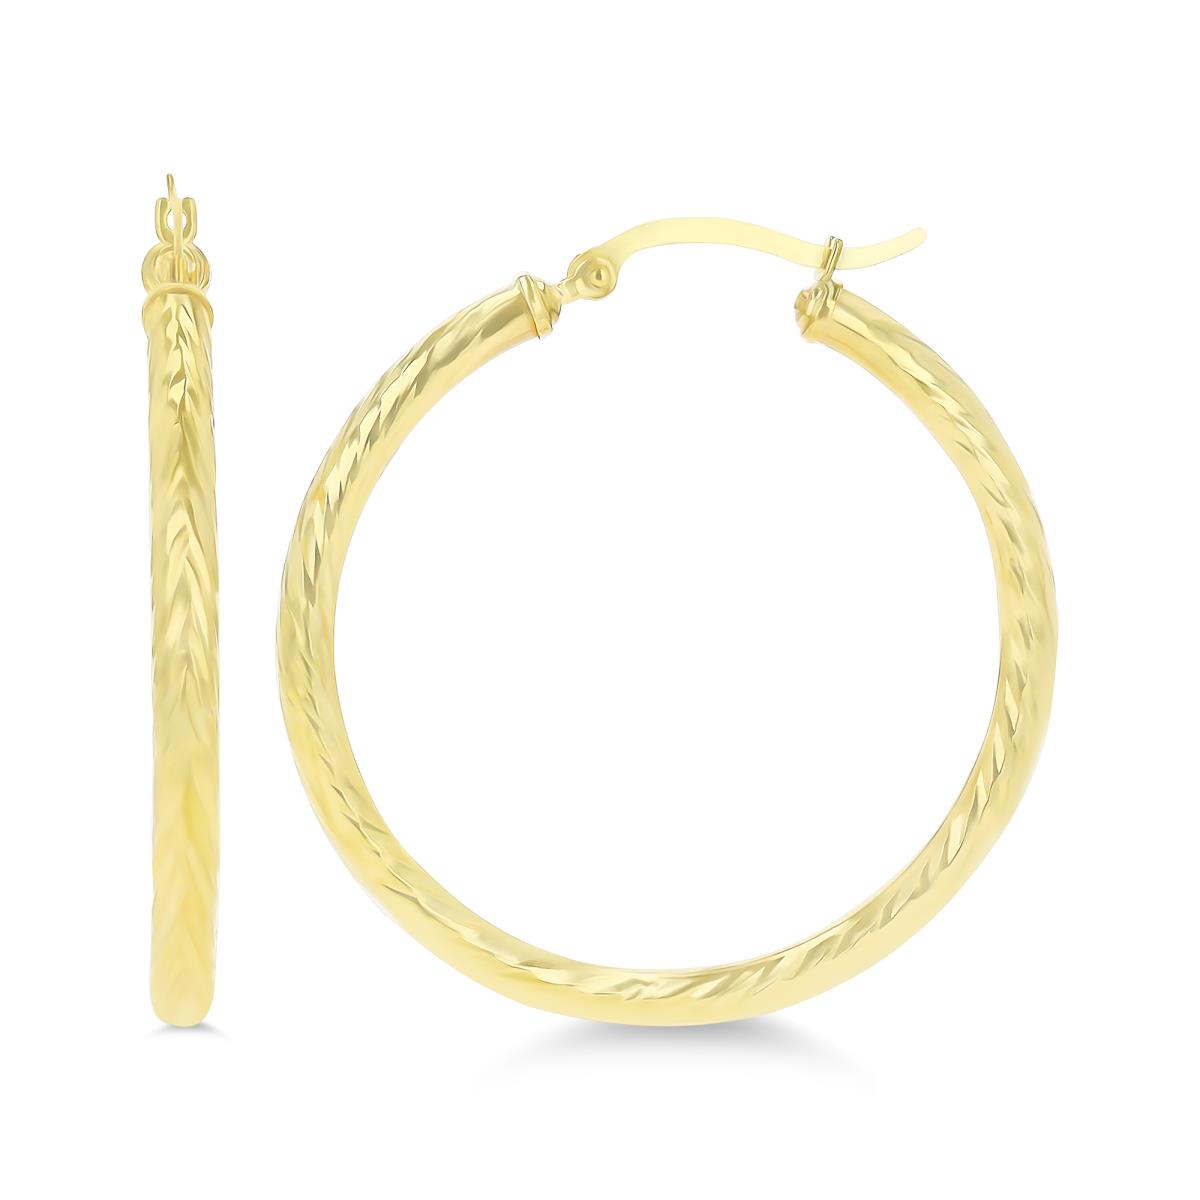 14K Yellow Gold 40x3mm (1.50") Twisted DC Hoop Earring